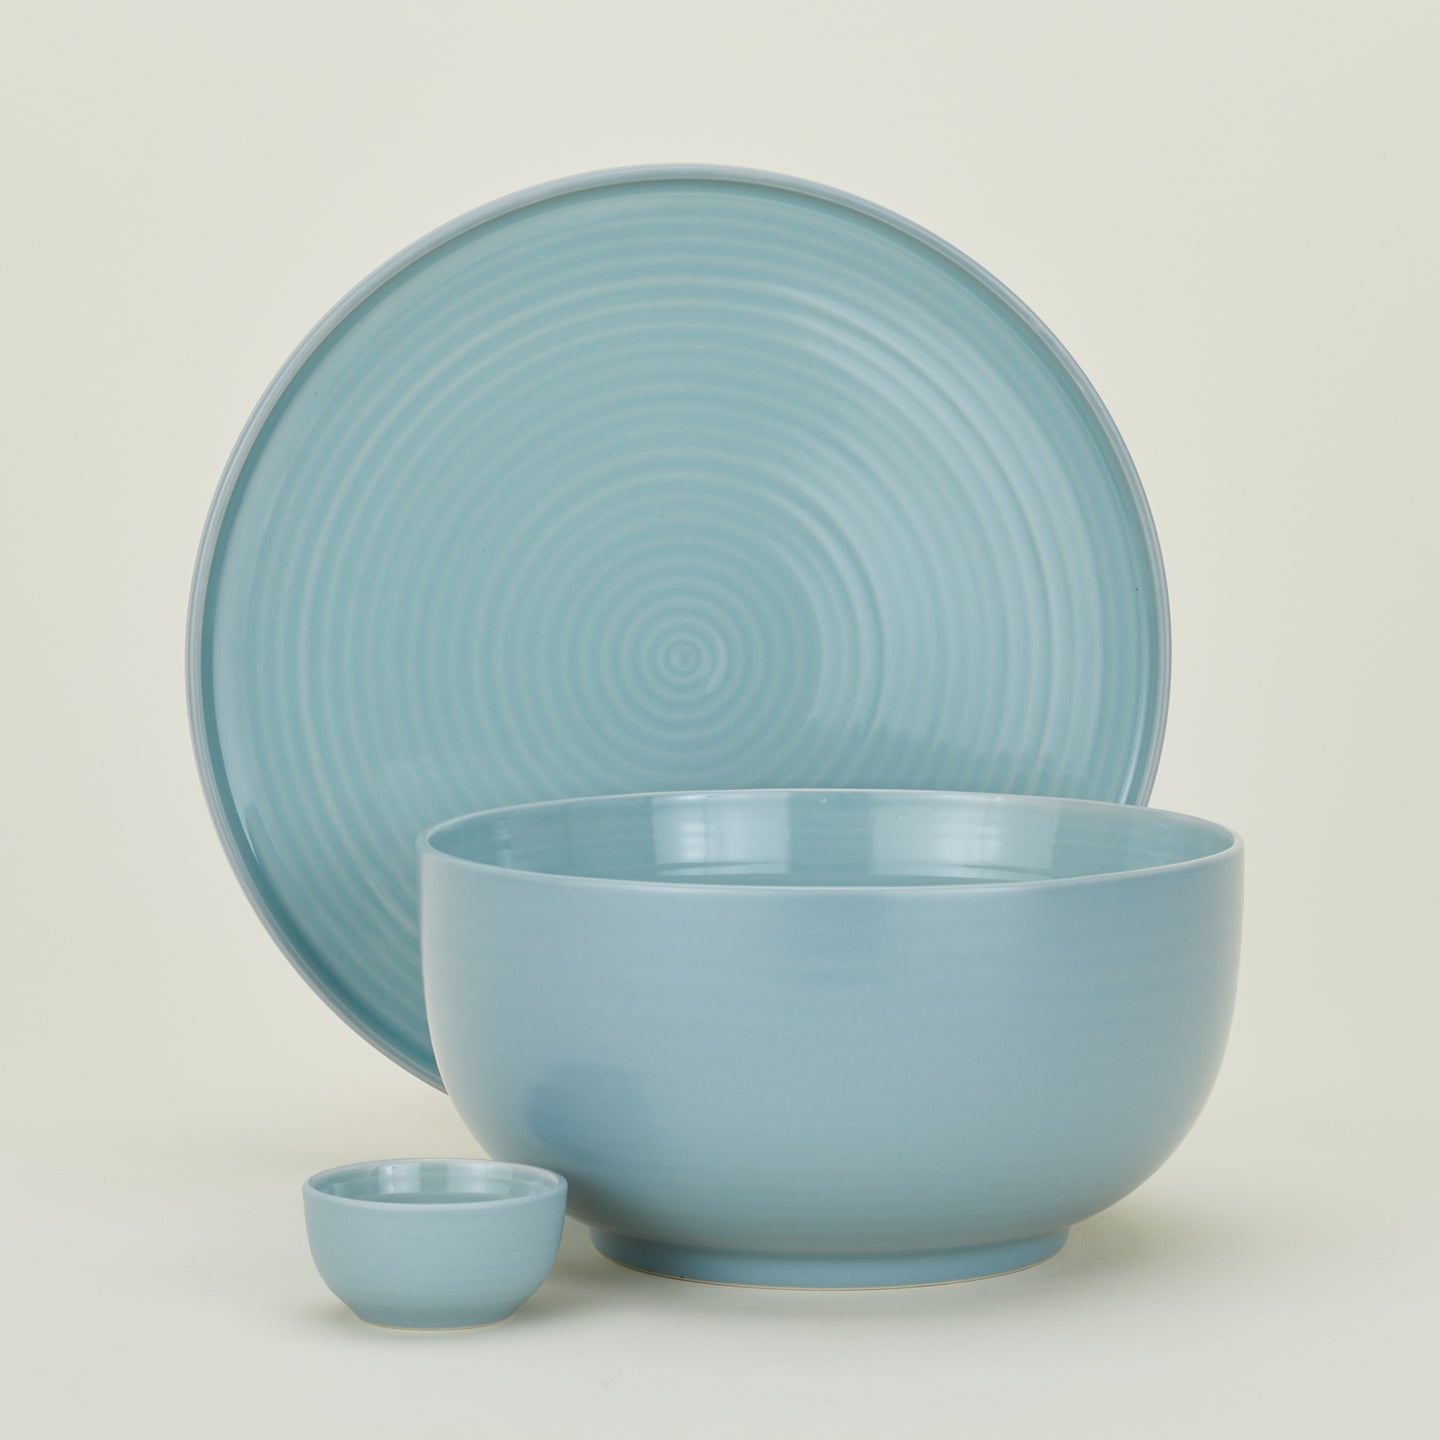 Group of Essential serving pieces in Sky including bowl, platter and extra small bowl.